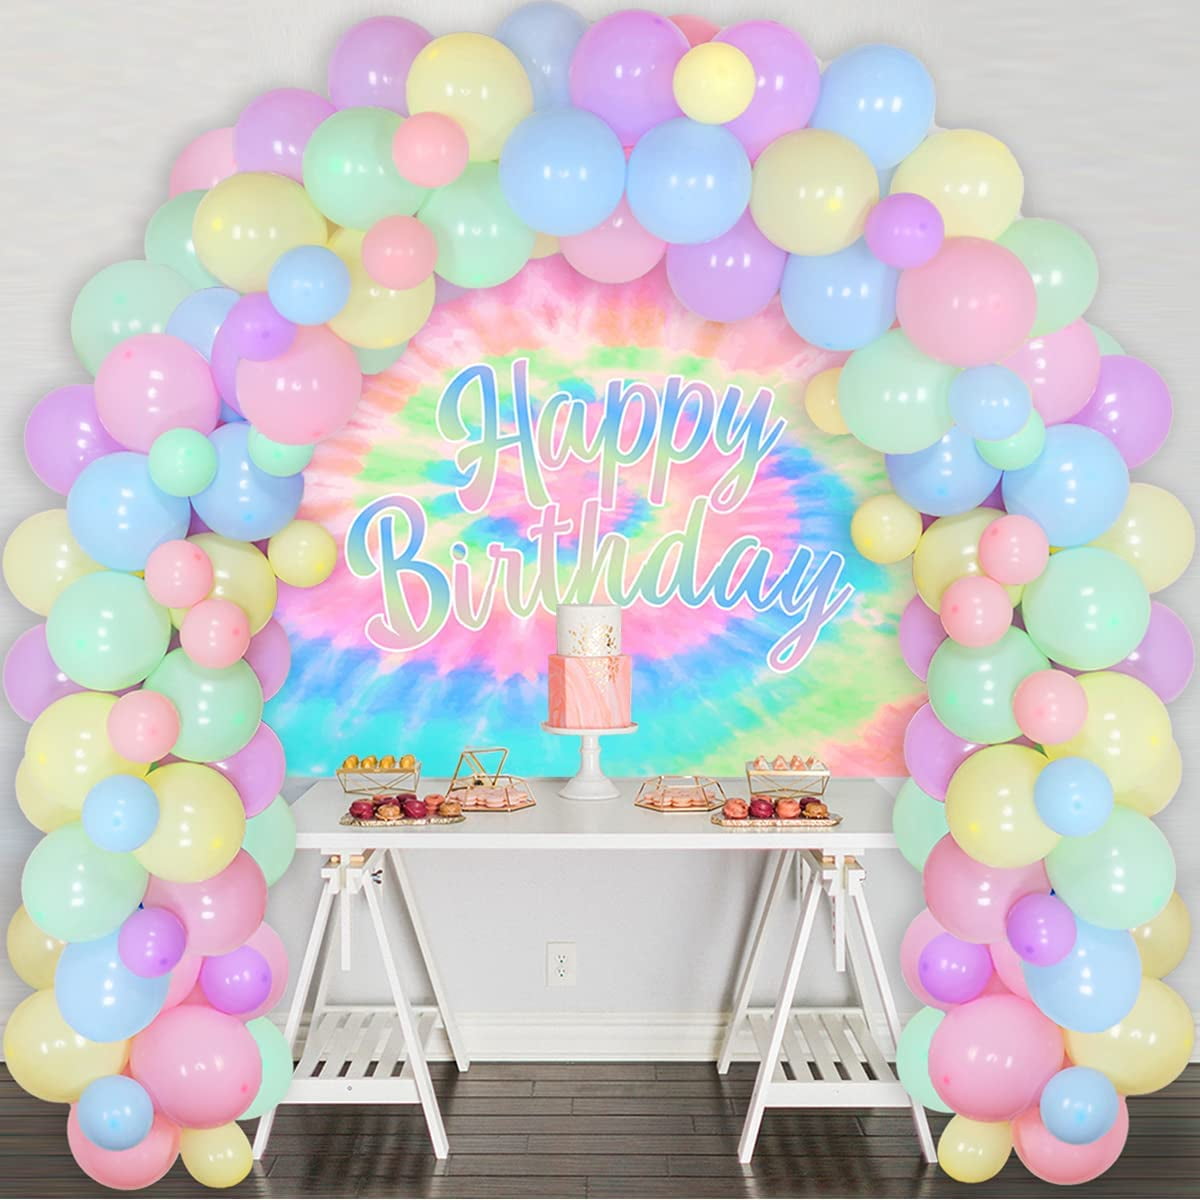 Hippie Theme Party Decorations, 60's Photo Backdrop, Tie Dye Balloons,  Garland Kit for Retro 60s Peace and Love Party, 1960s - AliExpress